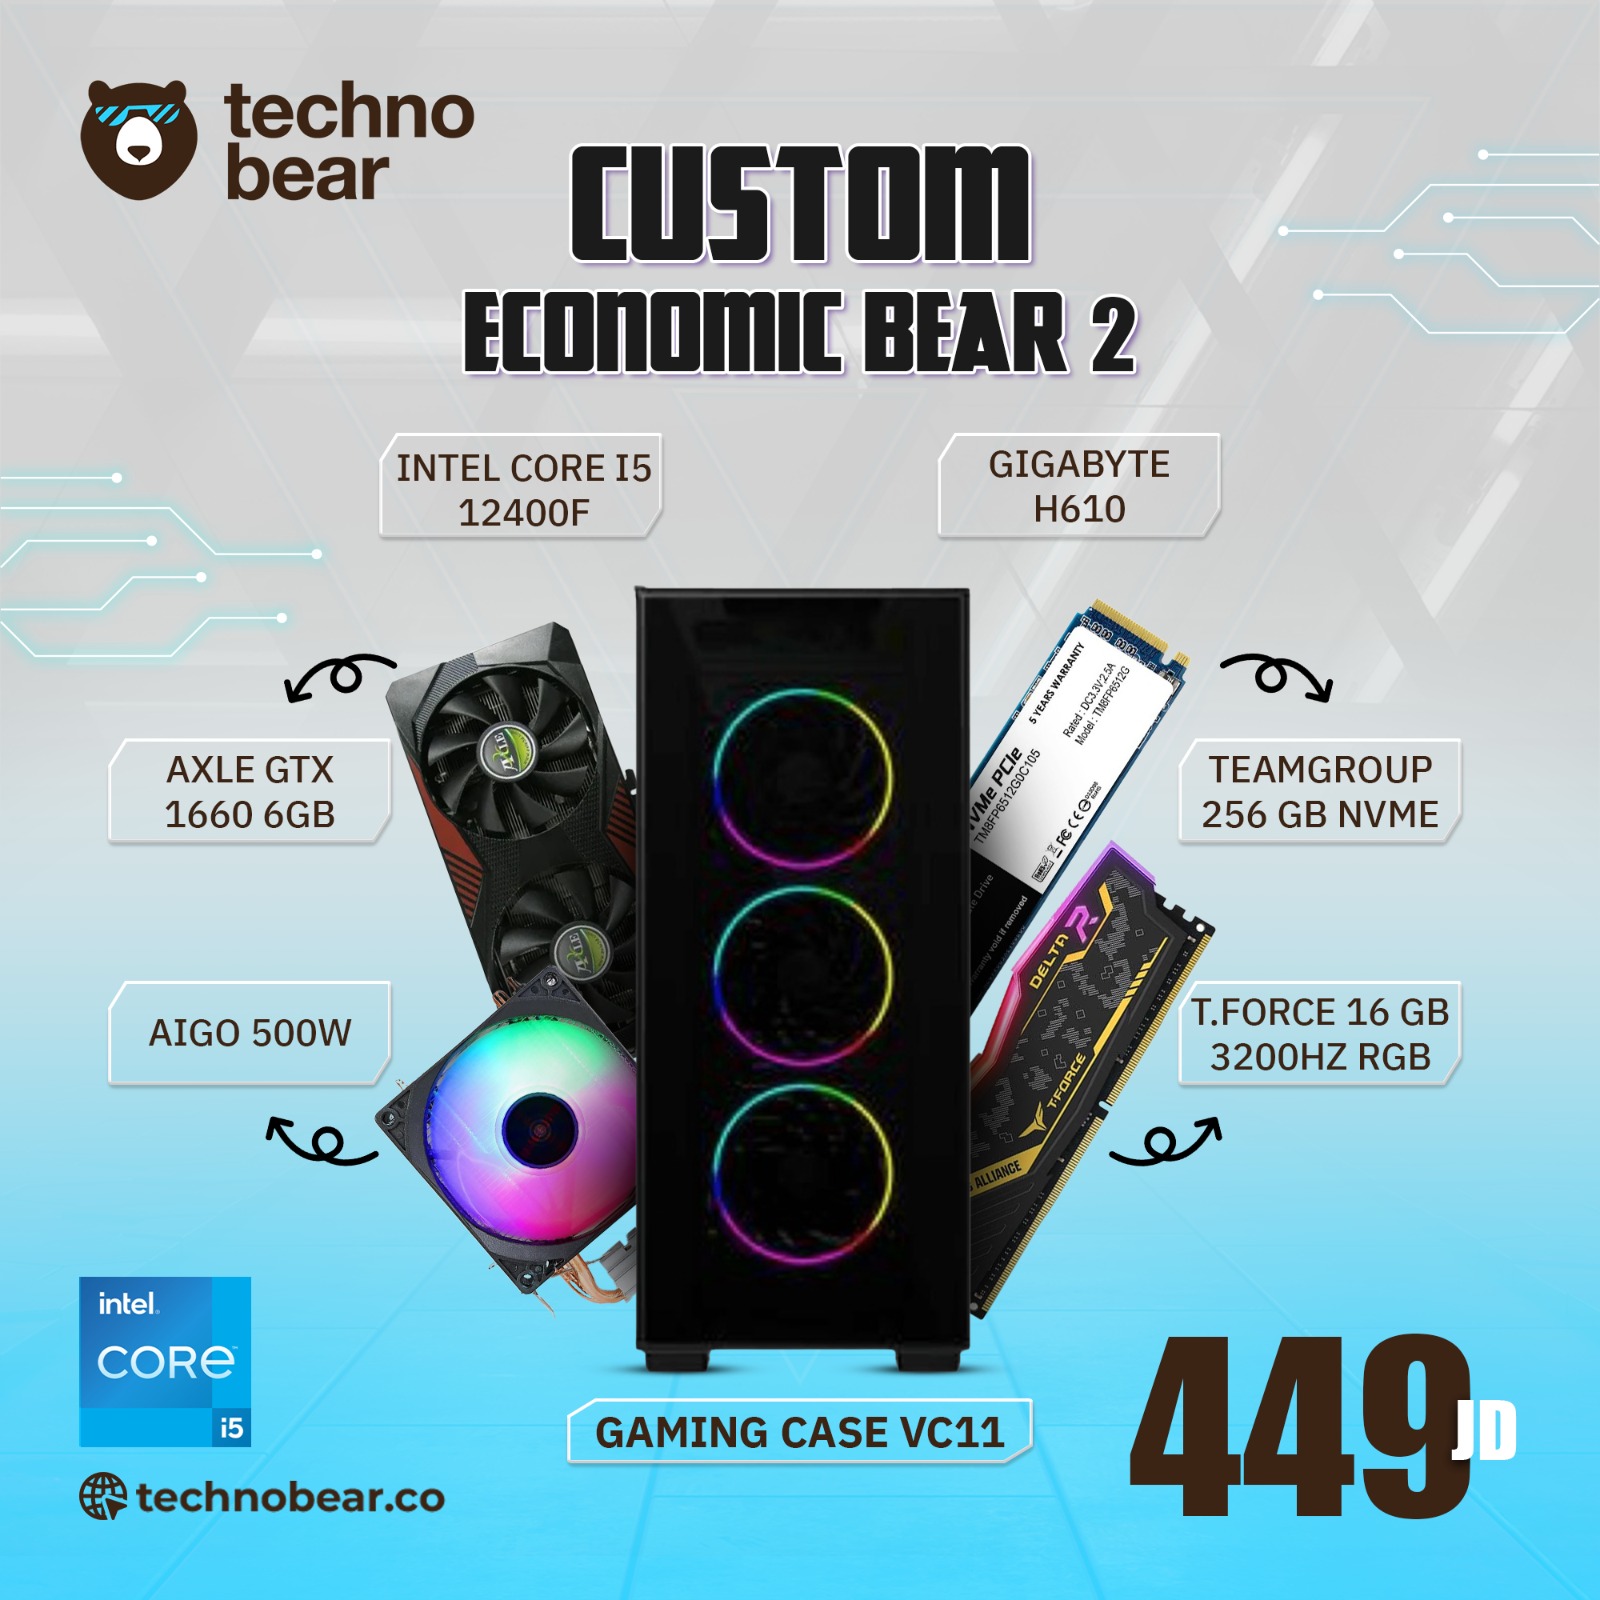 product-name:Custom Economic bear 2,supplier-name:Mania Computer Store